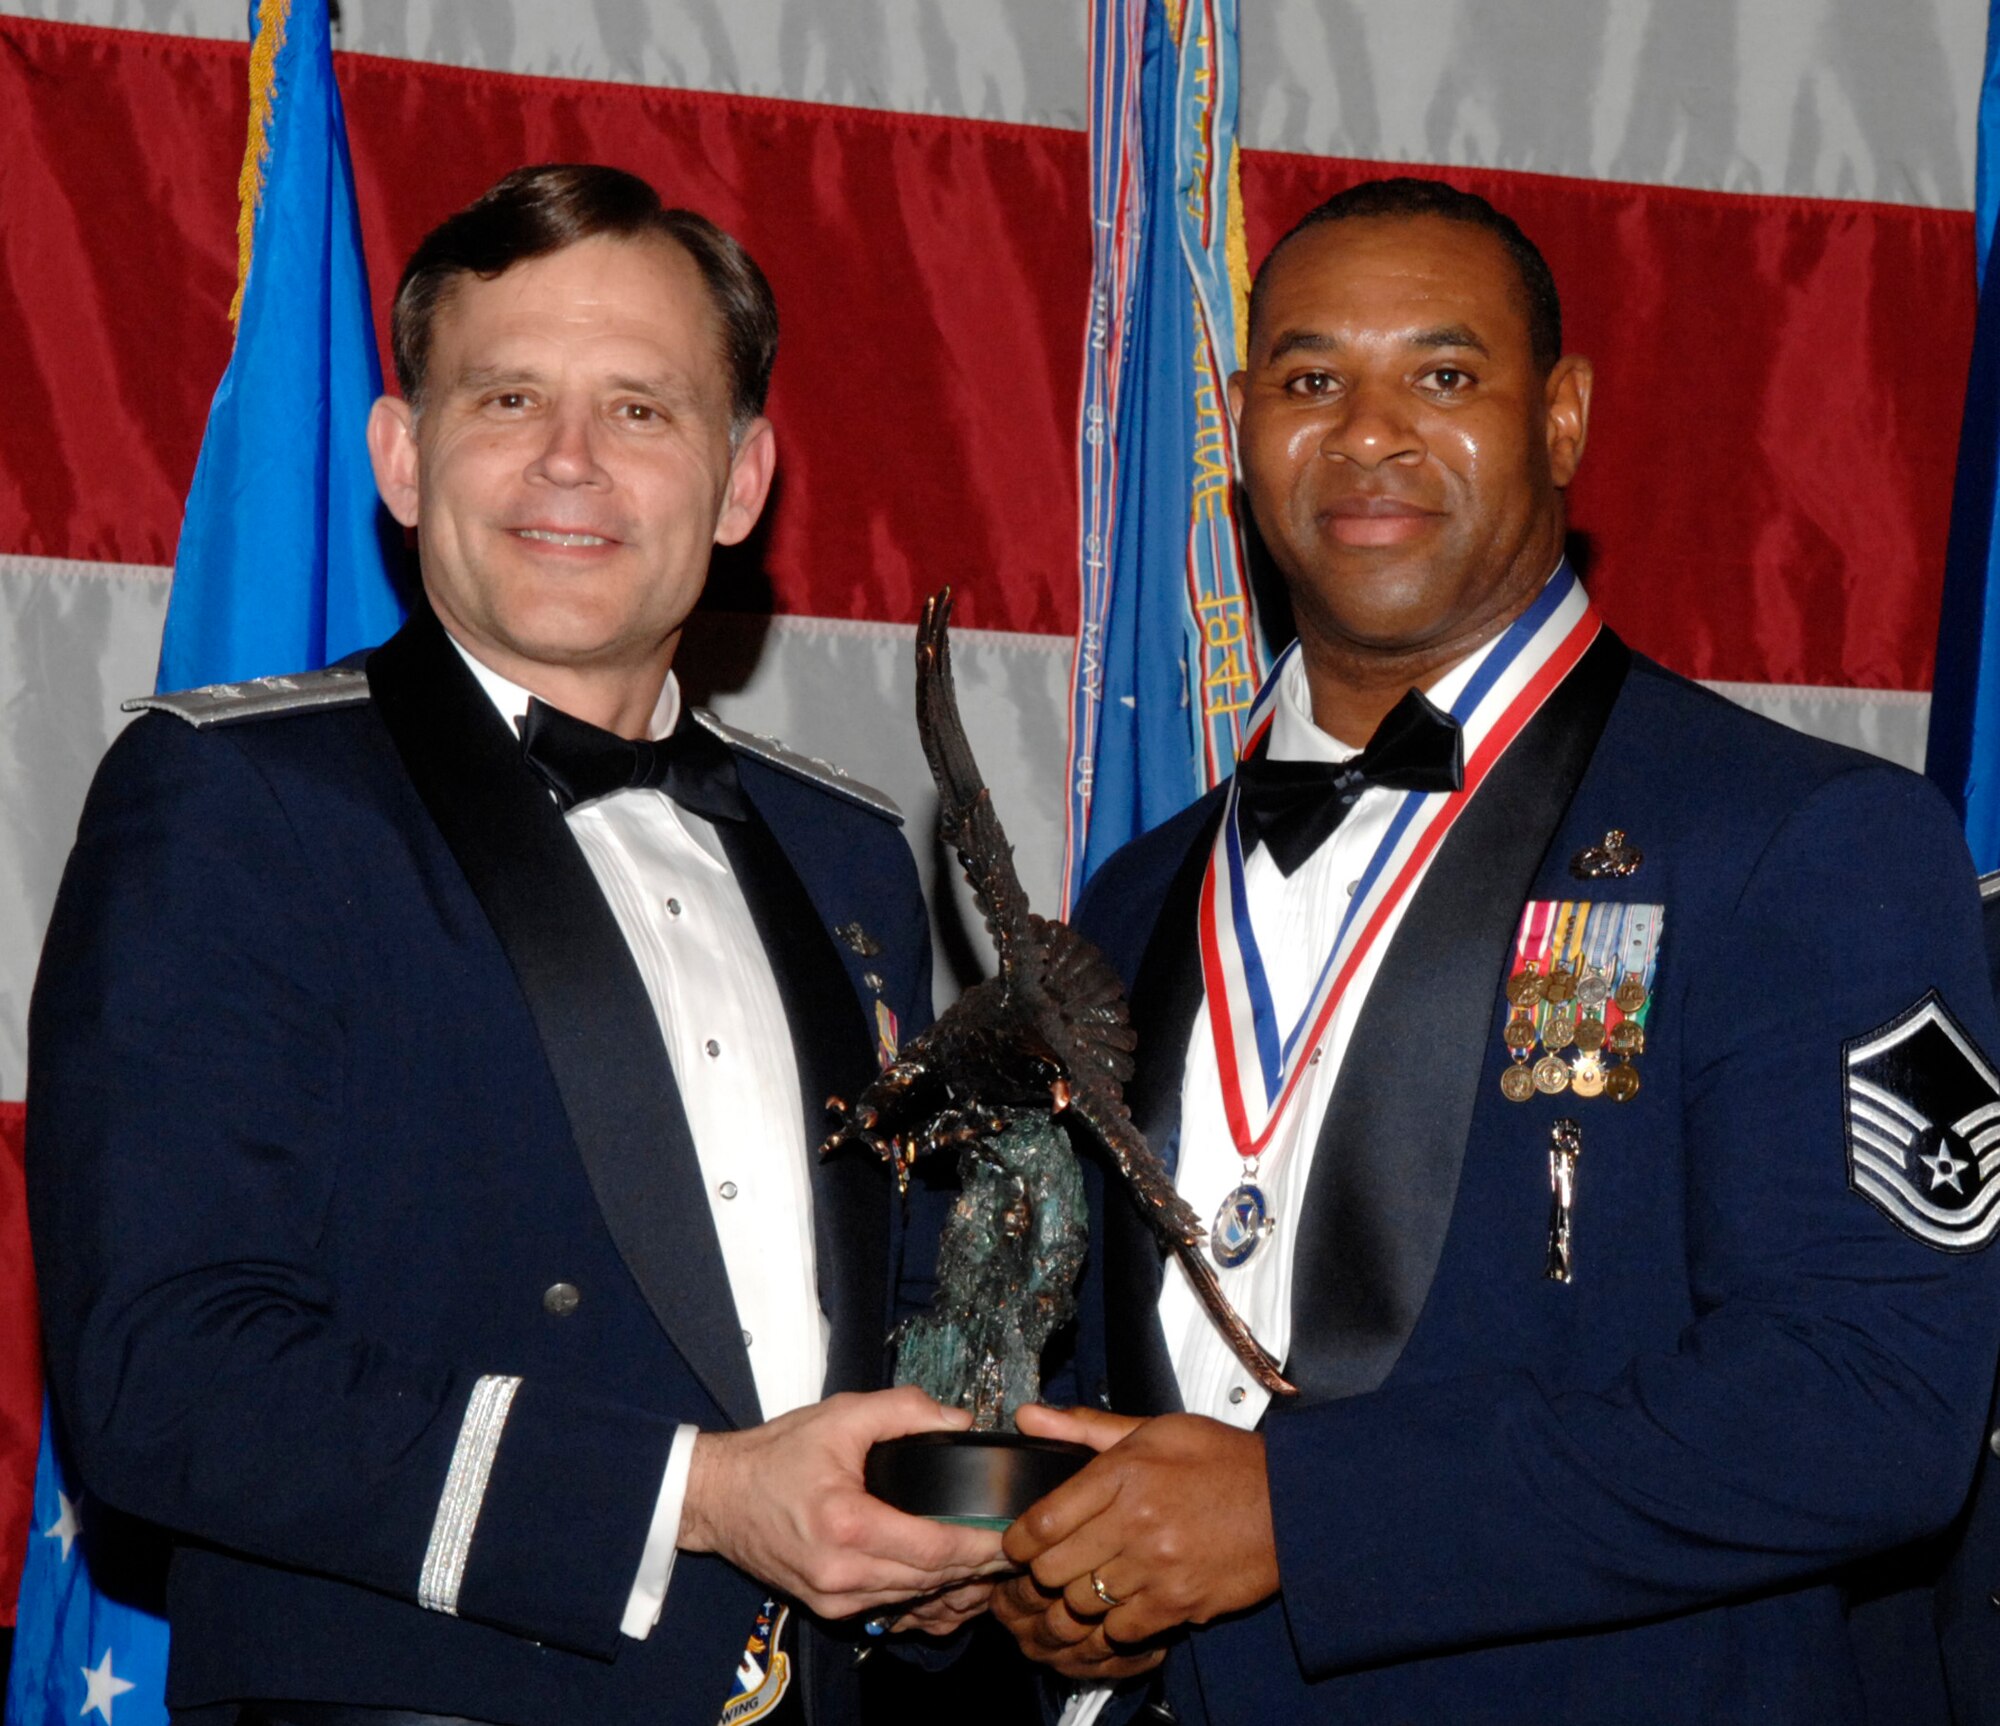 Master Sgt. Clay Slayton, 31st Test and Evaluation Squadron, won the 53d Wing Senior NCO of the Year Award during the annual awards banquet Jan. 31 at the Emerald Coast Conference Center.  The night’s guest speaker and former 53d commander, Maj. Gen. (retired) Jack Catton (left) presented the awards.  U.S. Air Force photo.